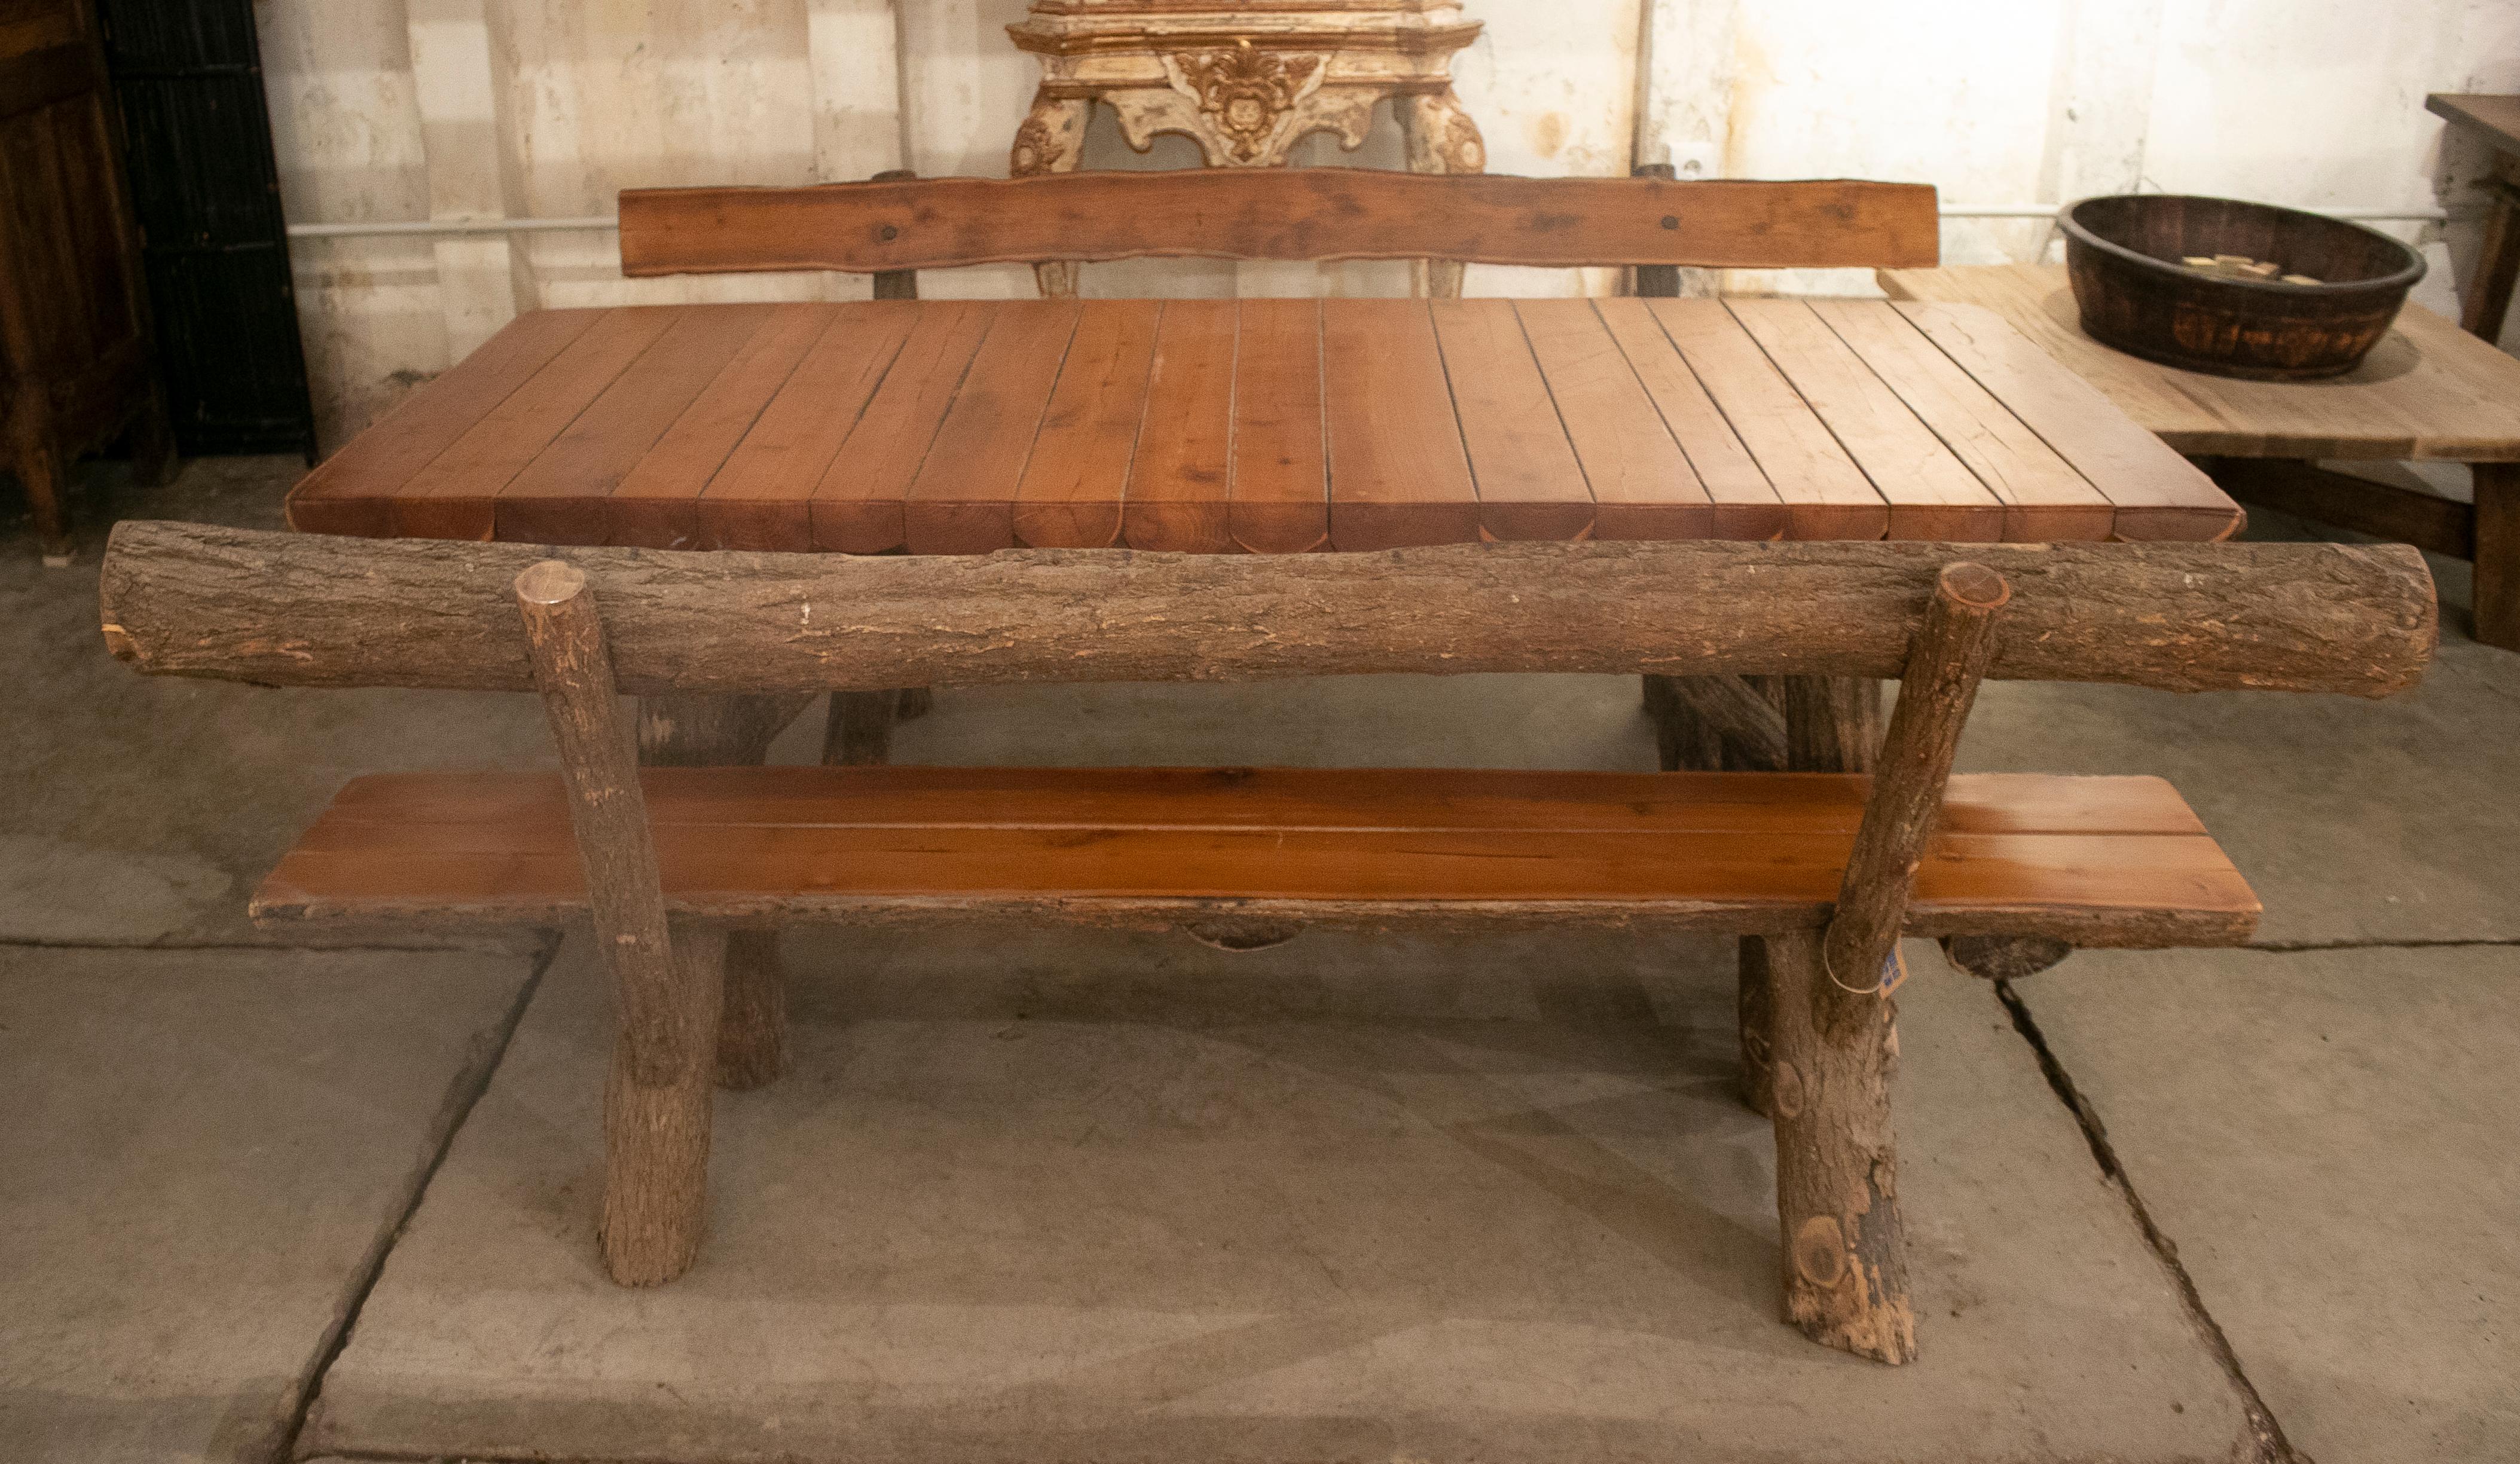 Rustic 1970s Spanish handmade garden wooden table with benches. 

Table dimensions: 77 x 202 x 85cm
Benches dimensions: 84 x 200 x 50cm.